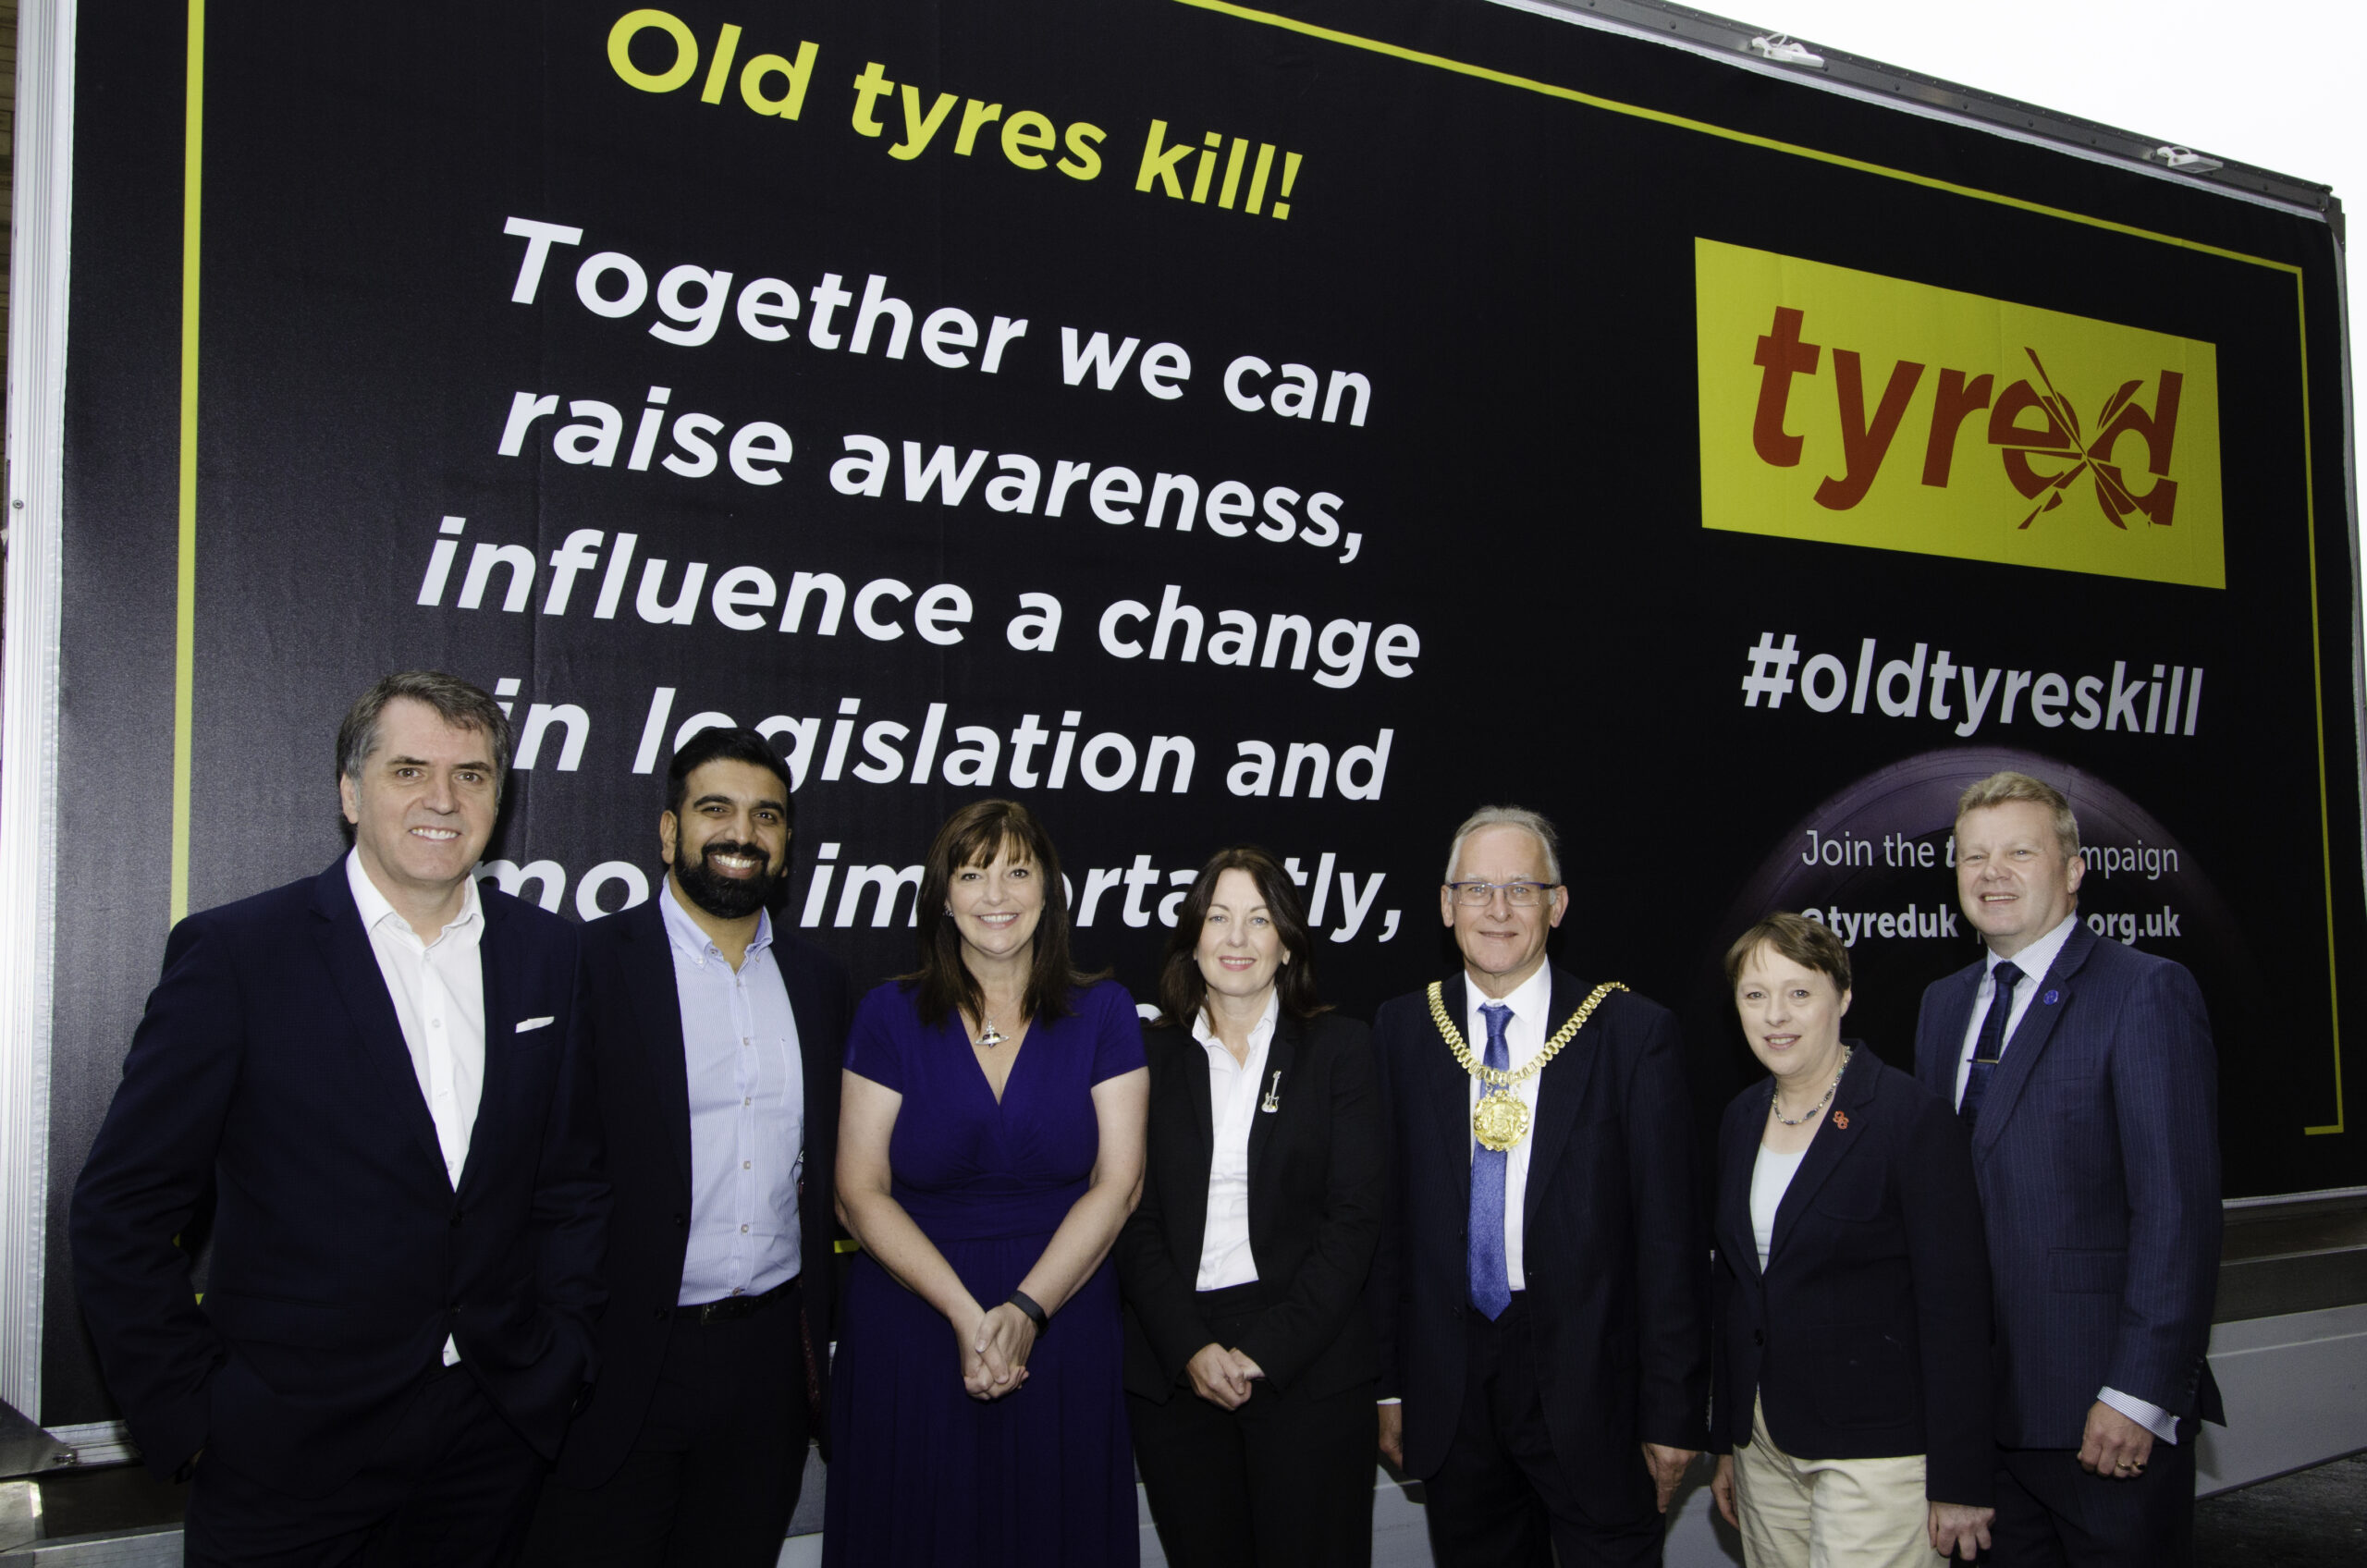 Tyred Campaign in Liverpool